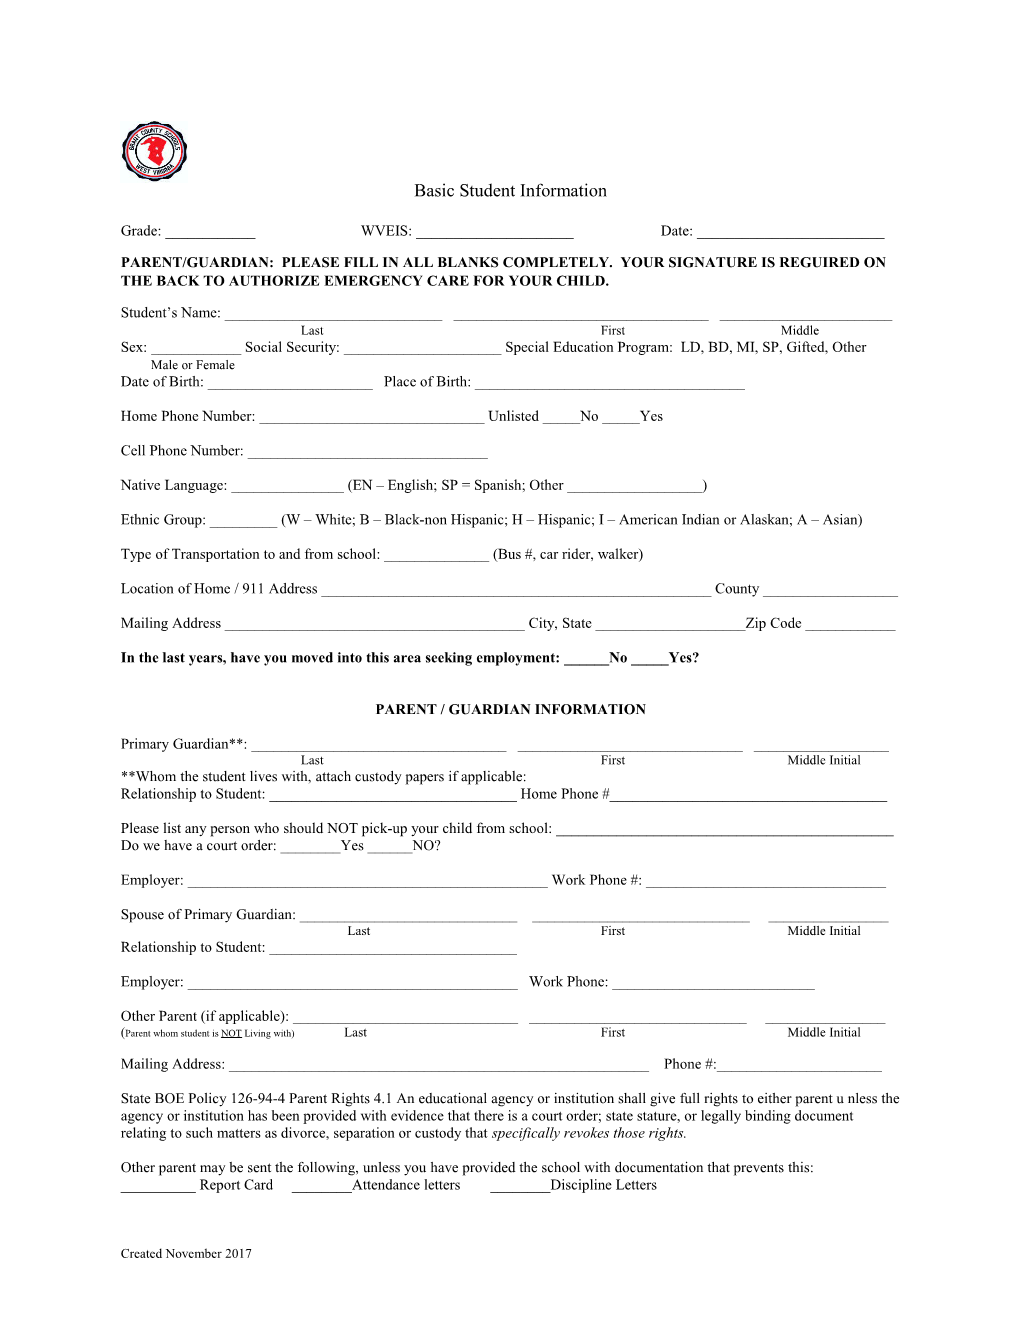 Parent/Guardian: Please Fill in All Blanks Completely. Your Signature Is Reguired on The